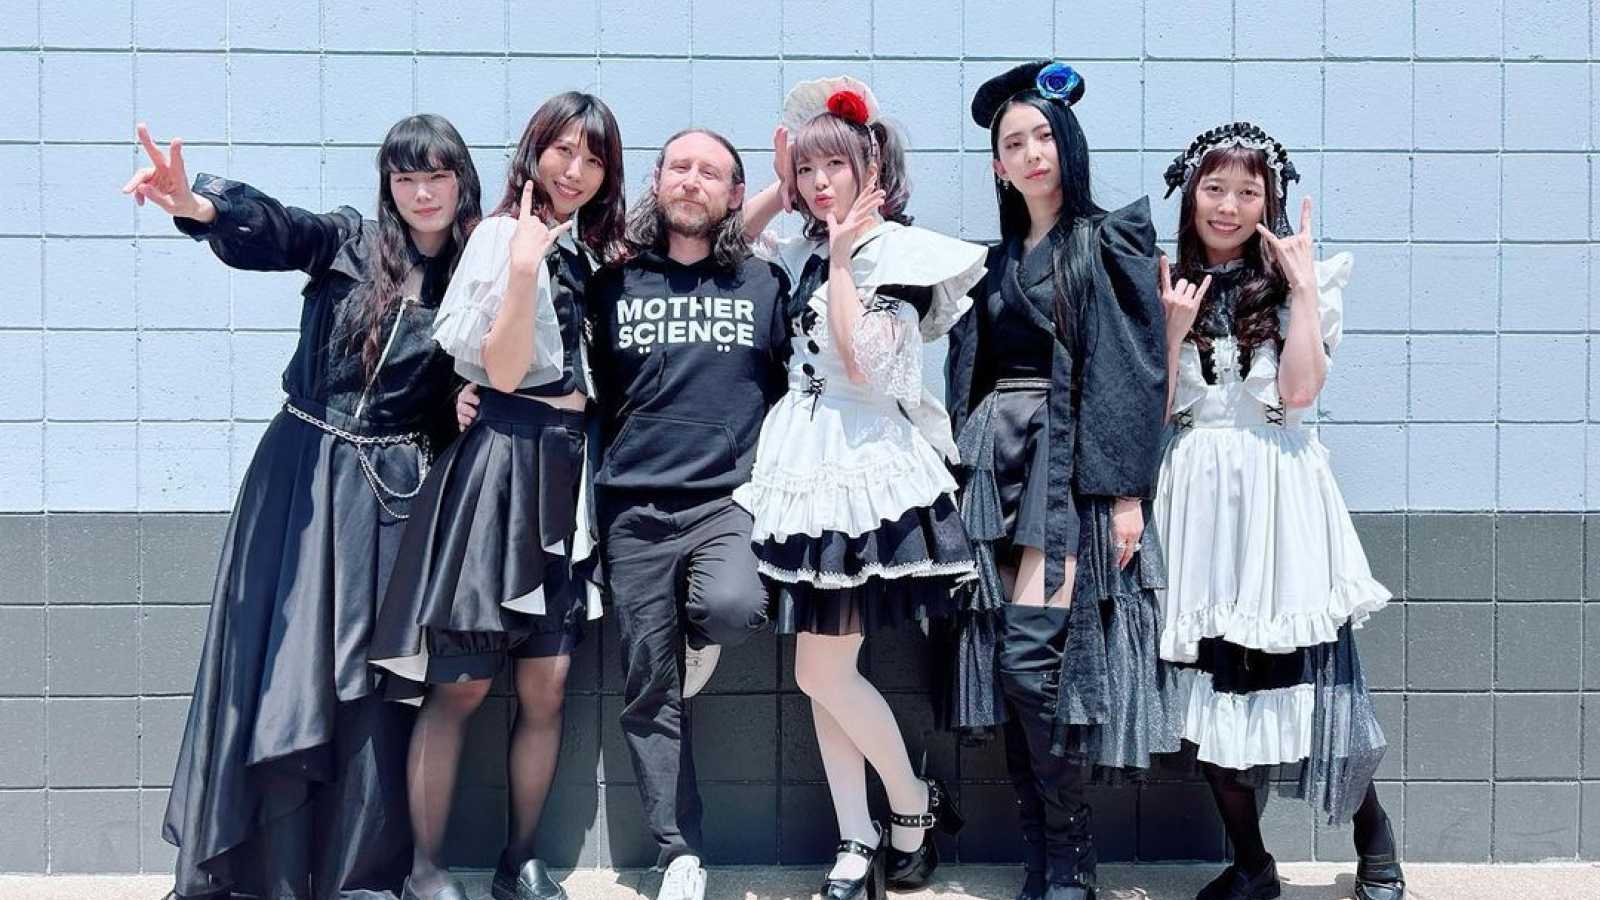 BAND-MAID to Release New Single Co-Written by Mike Einziger of Incubus © BAND-MAID x Mike Einziger. All rights reserved.